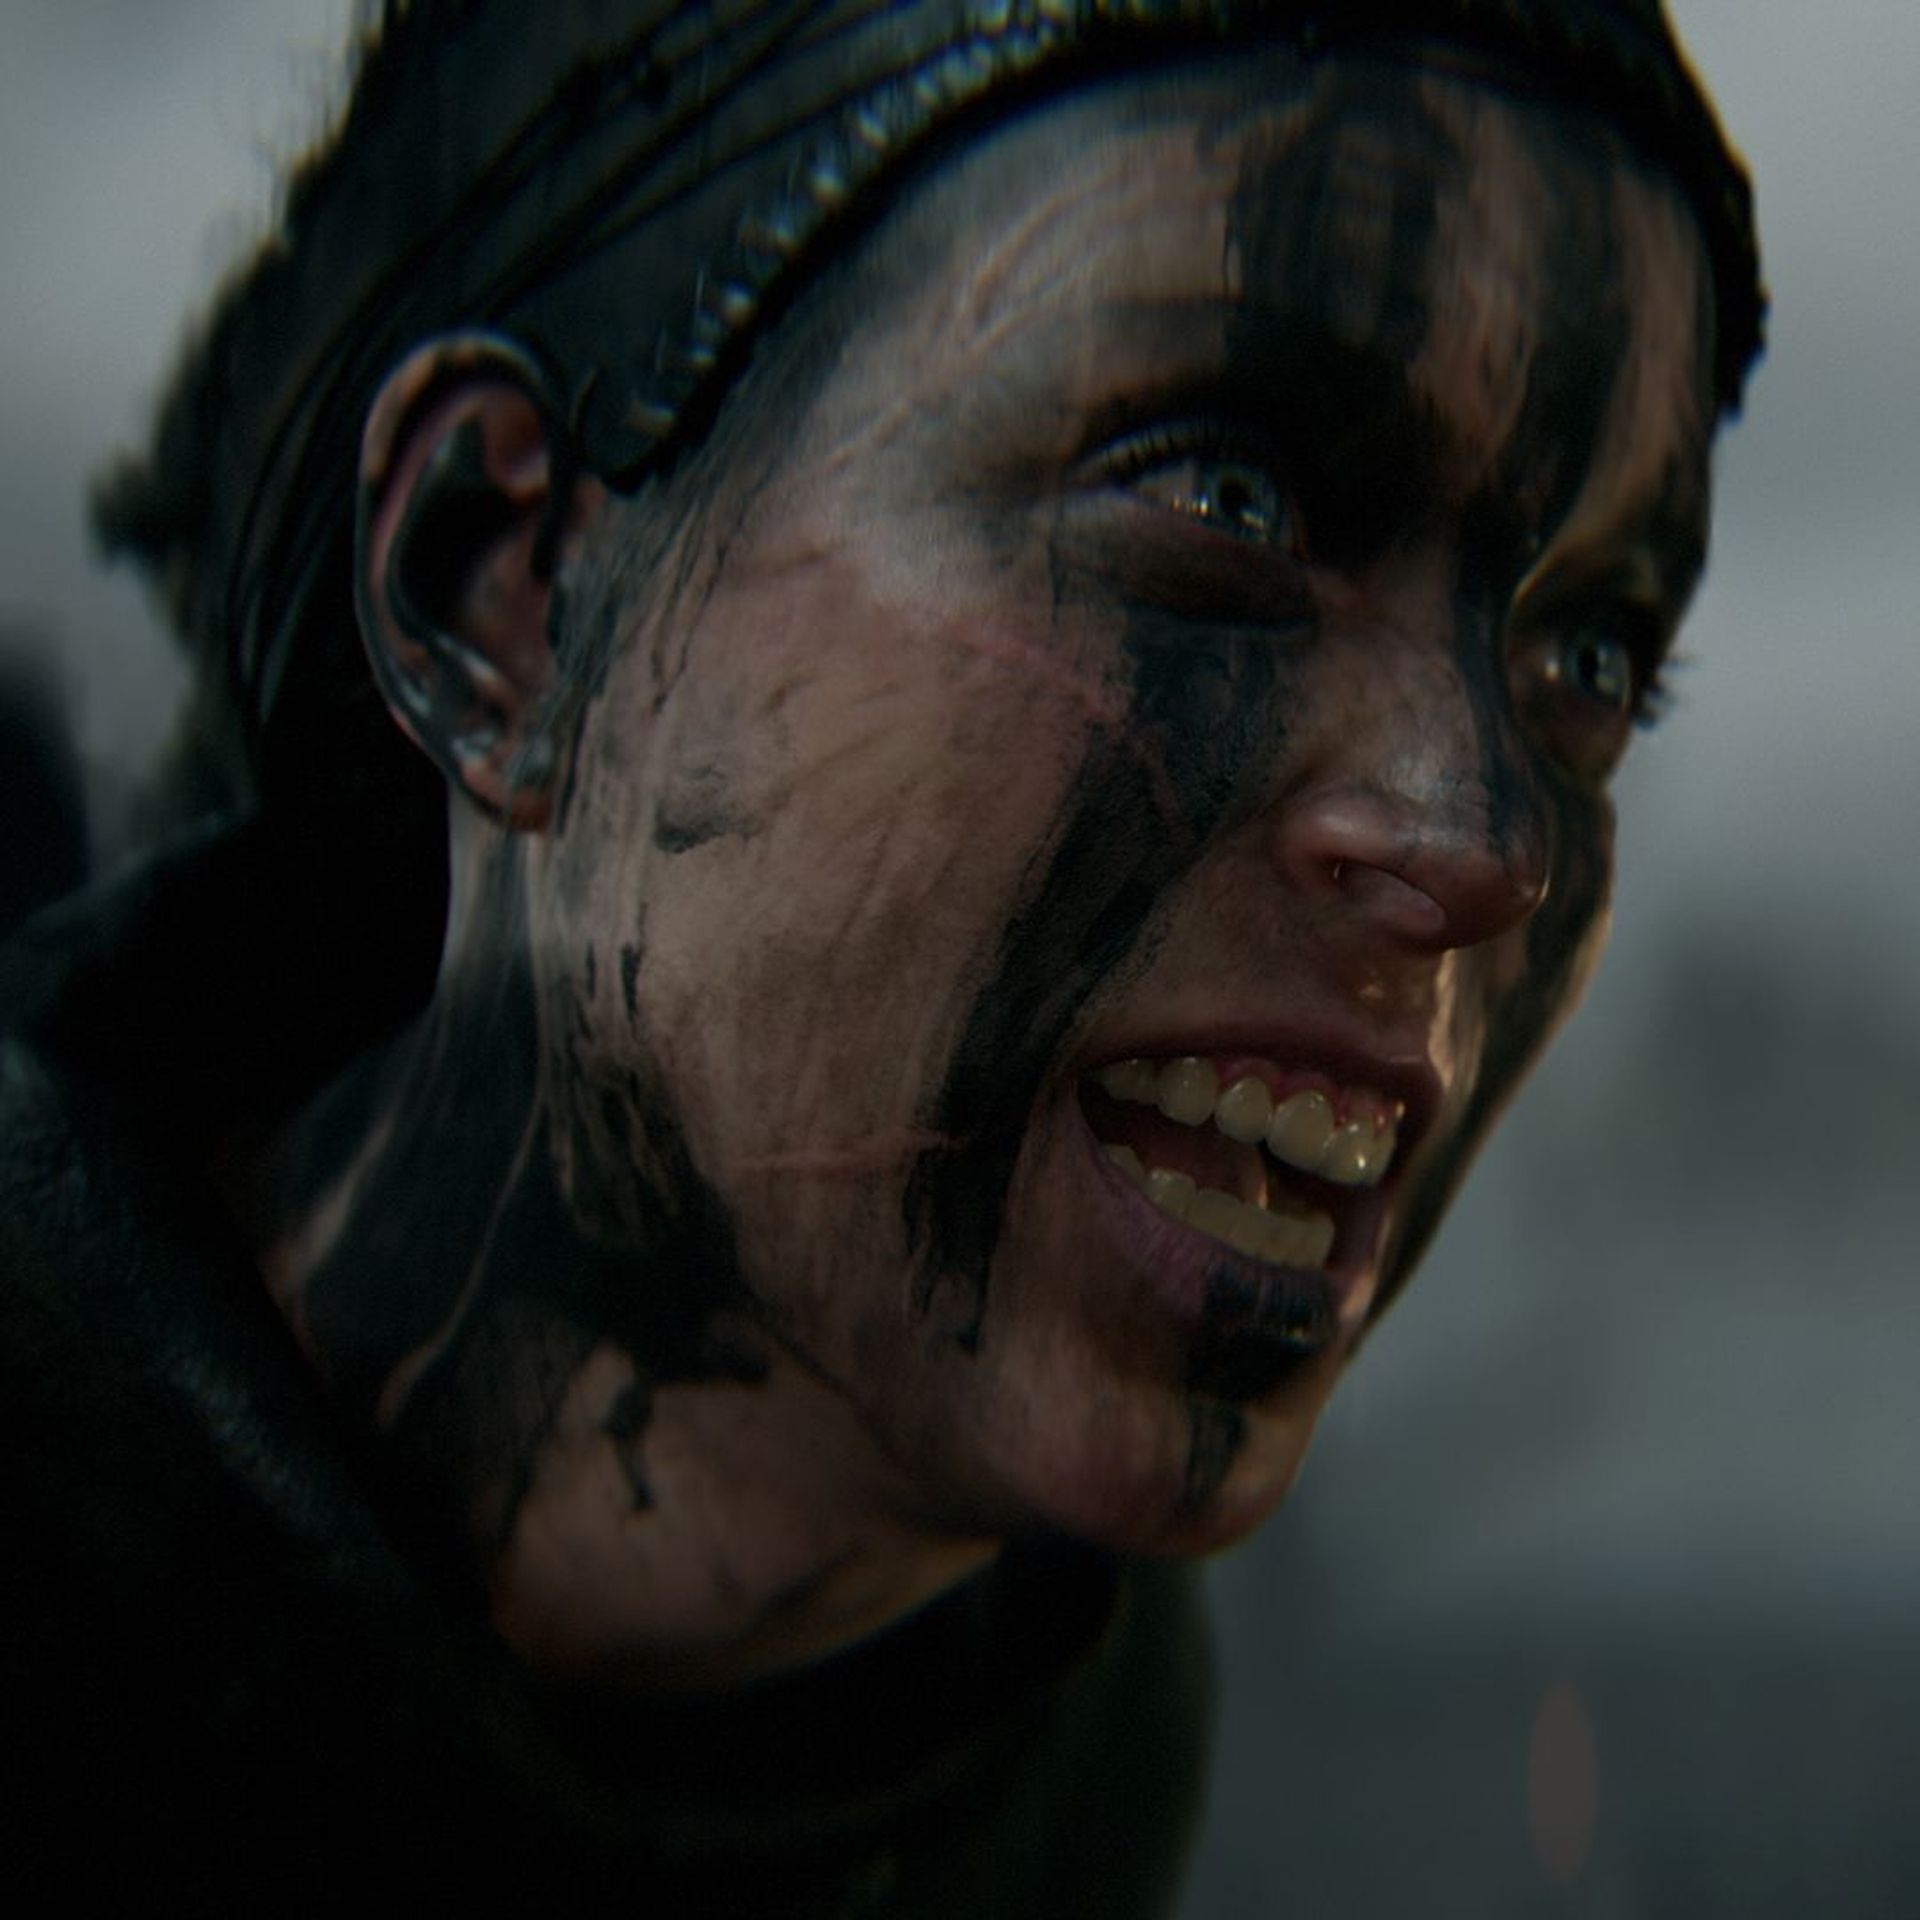 Hellblade 2 trailer had the best graphics of The Game Awards 2021